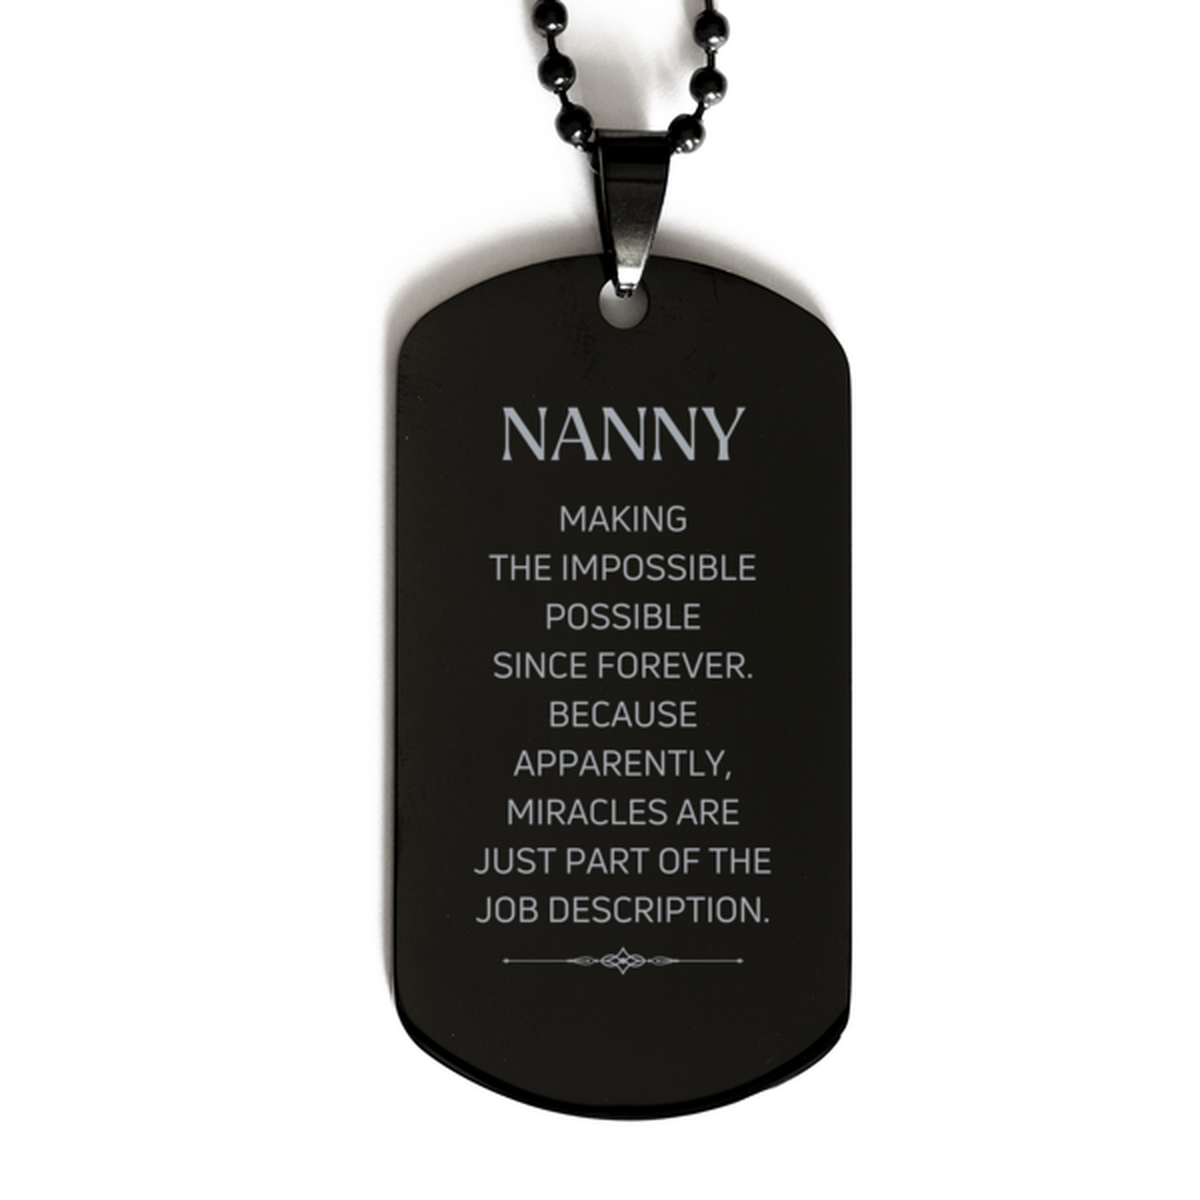 Funny Nanny Gifts, Miracles are just part of the job description, Inspirational Birthday Black Dog Tag For Nanny, Men, Women, Coworkers, Friends, Boss